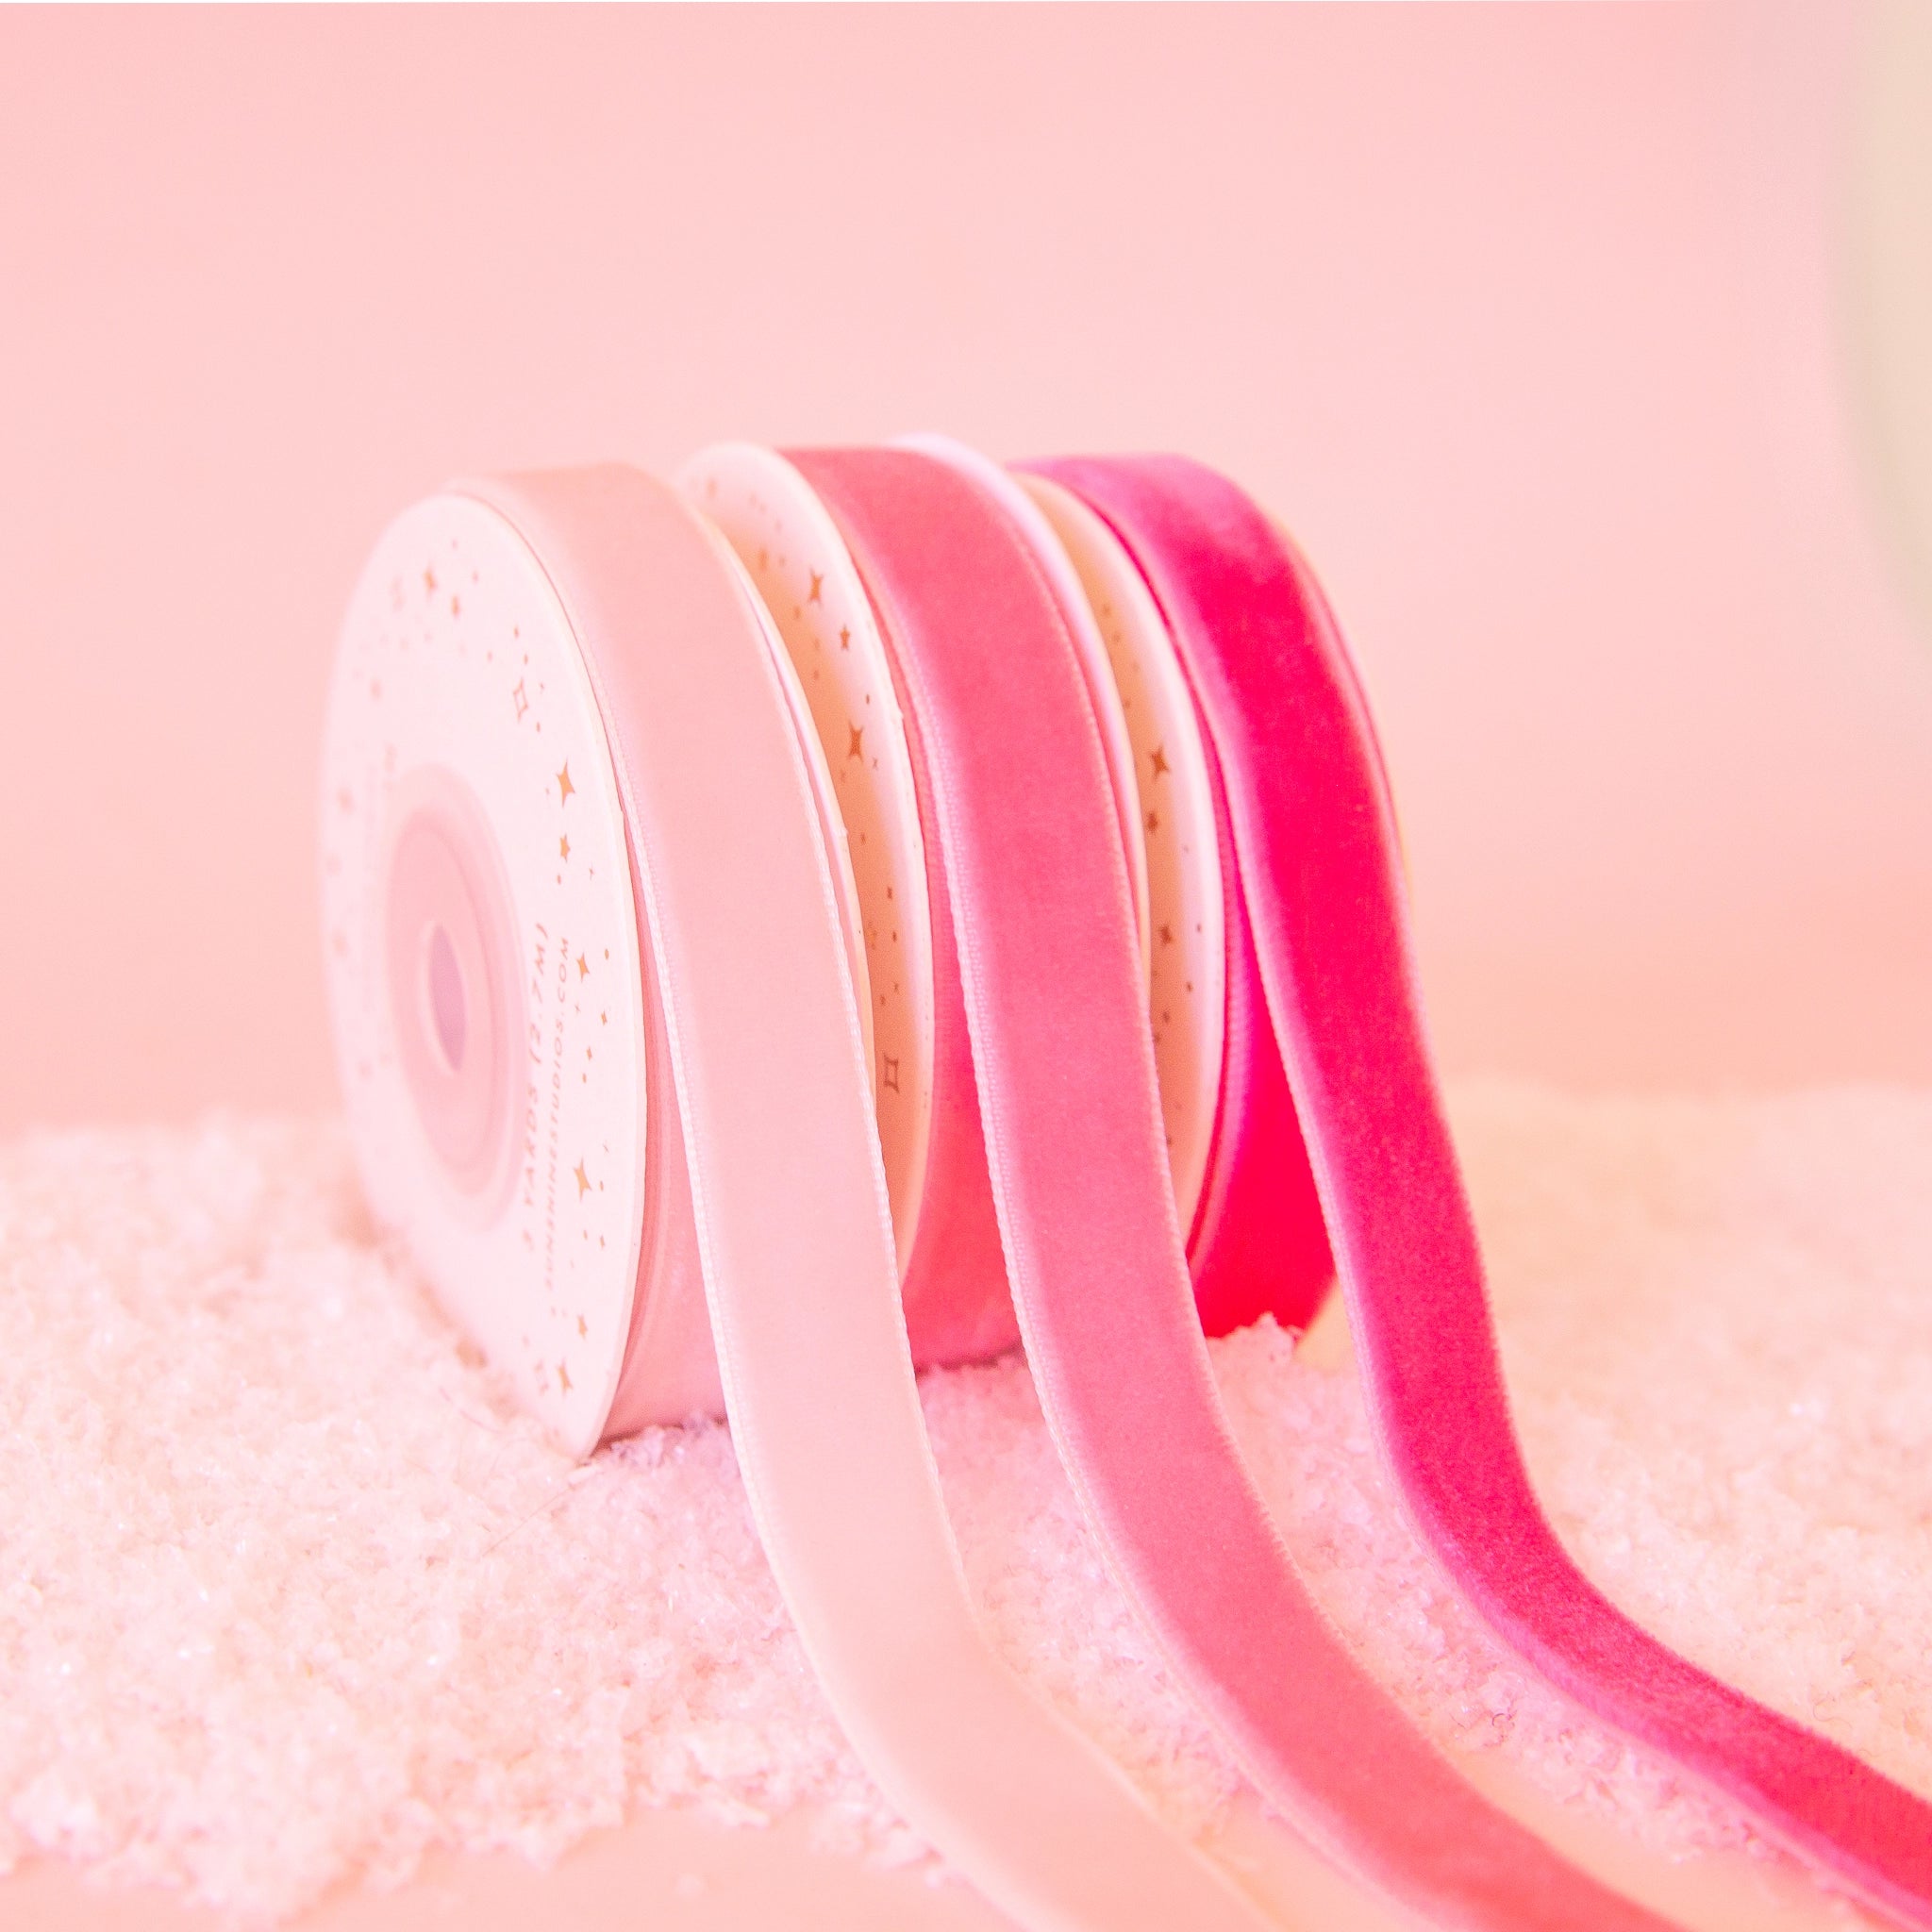 On a pink background is the three spools of velvet ribbon in three different shades of pink.